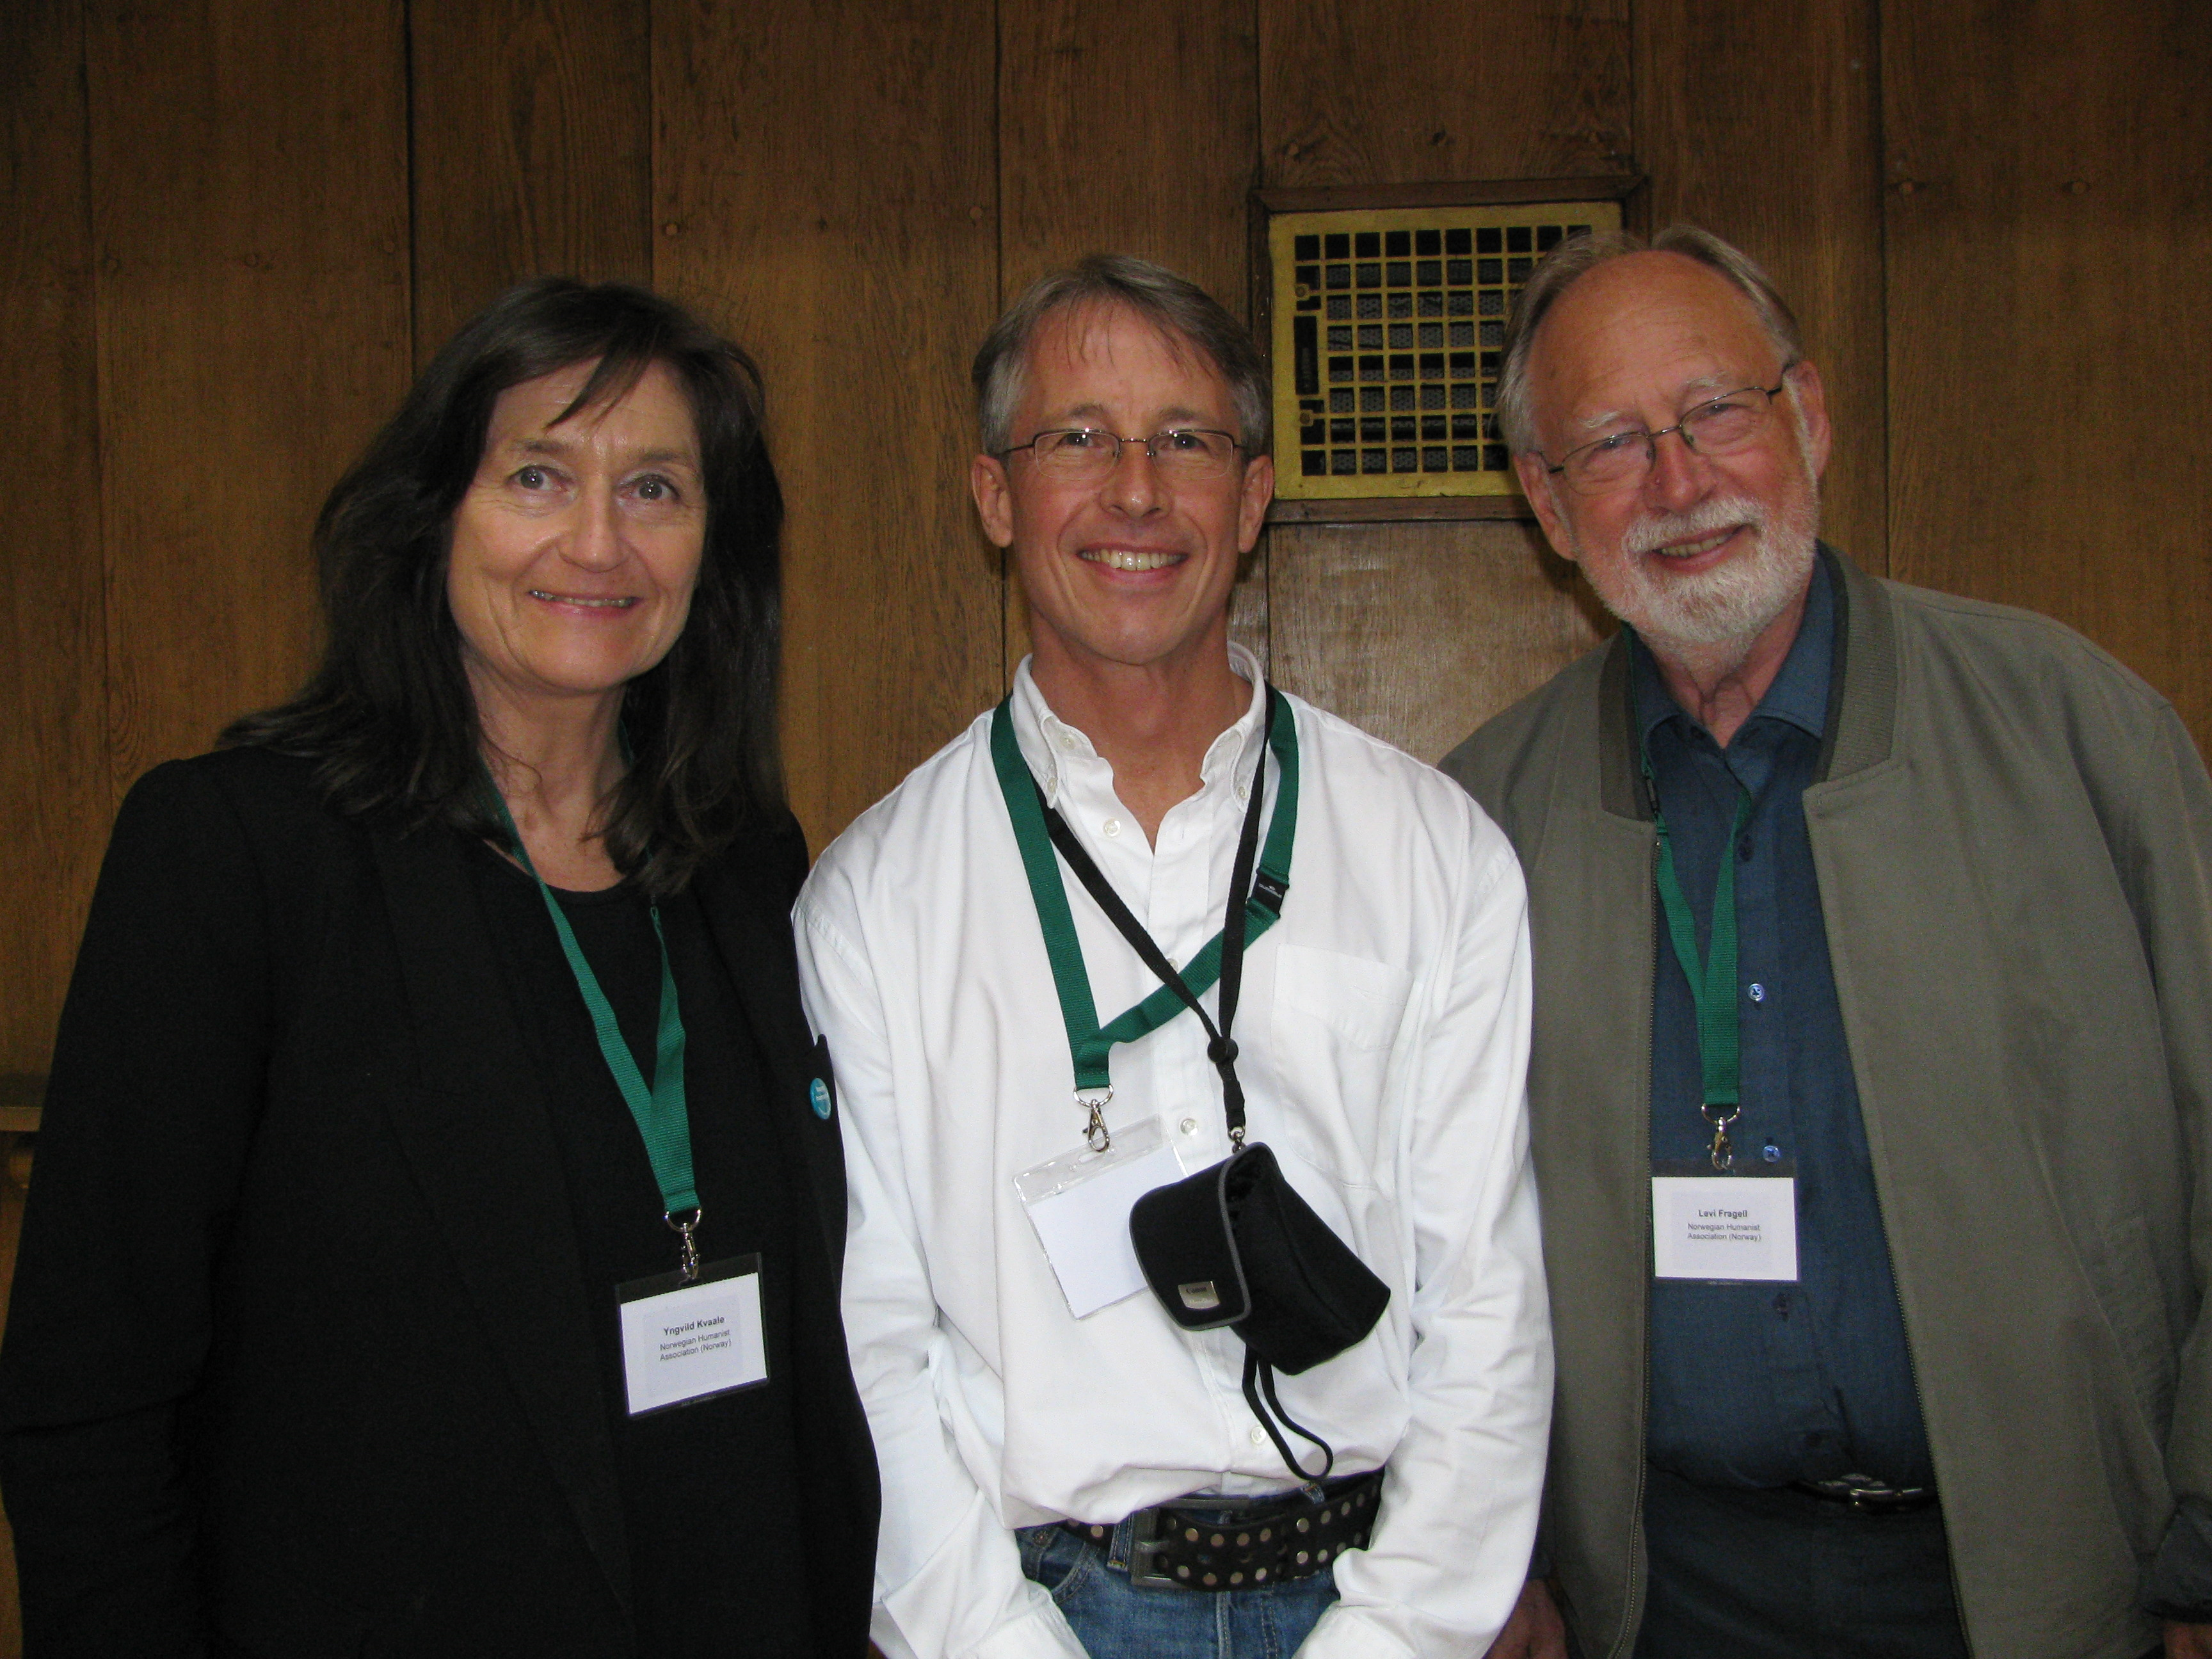 David Warden at Conway Hall, London, with Yngvild Kvaale and Levi Fragell from the Norwegian Humanist Association